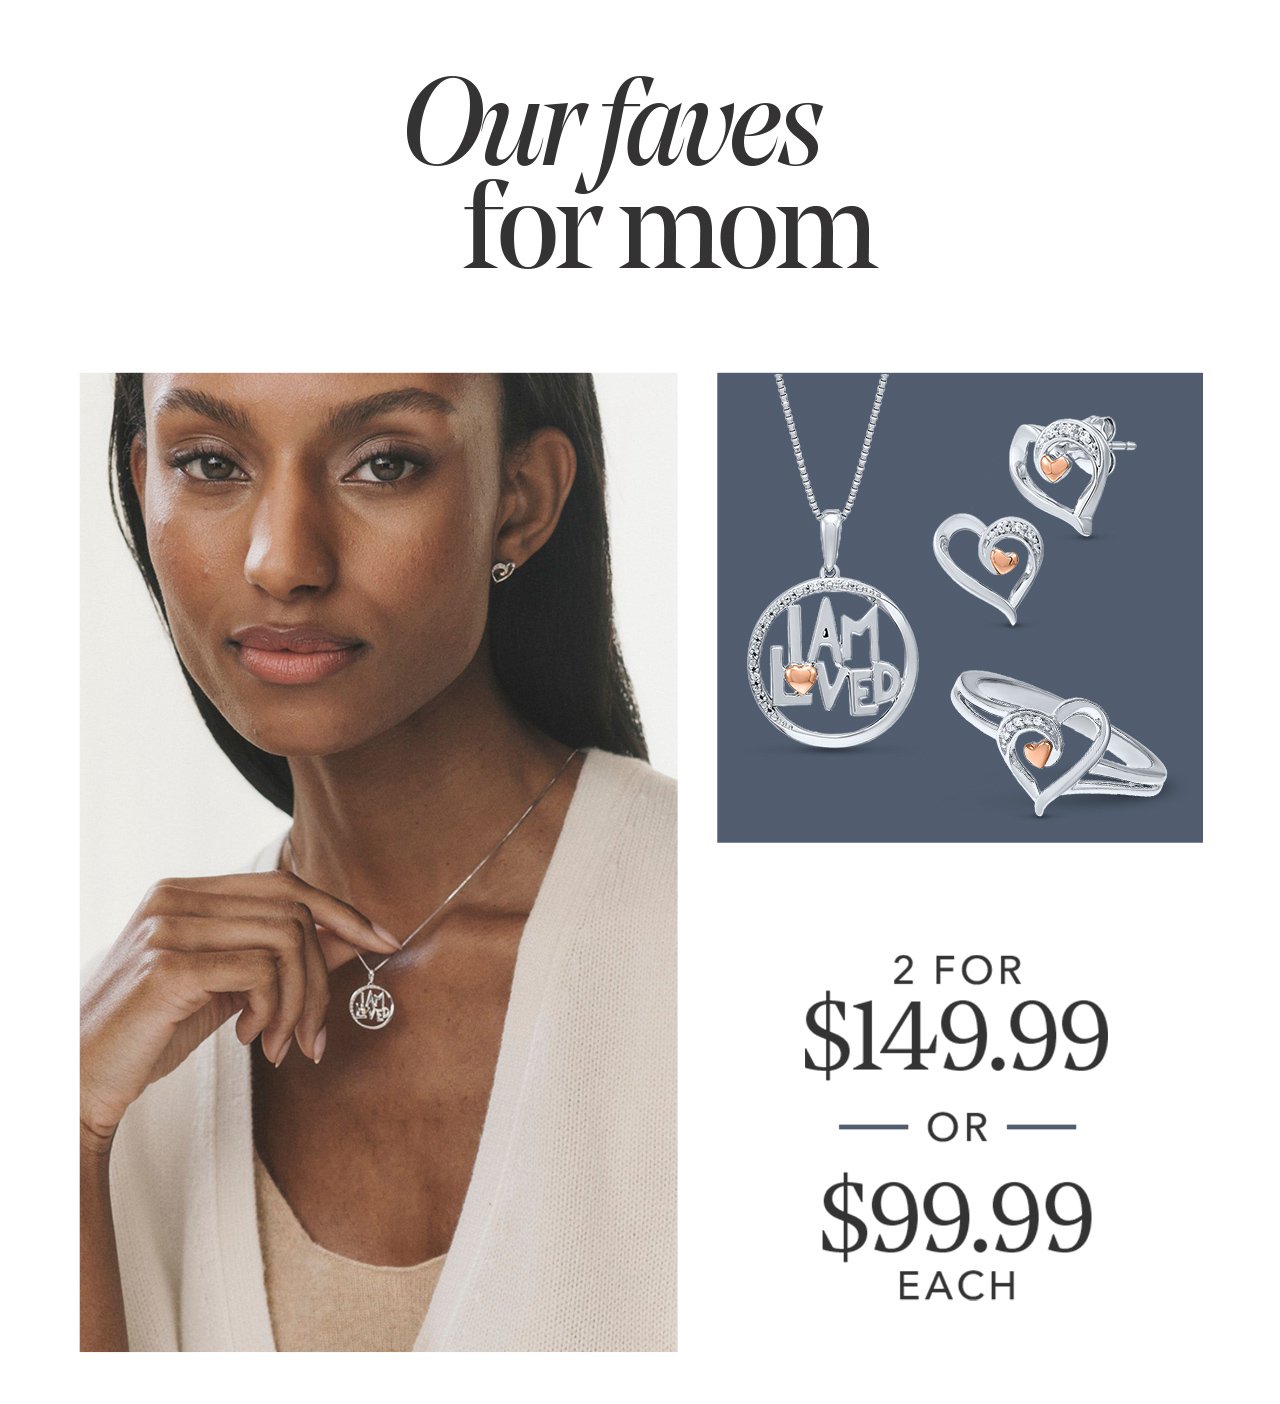 Our faves for mom - 2 FOR \\$149.99 —OR— \\$99.99 EACH